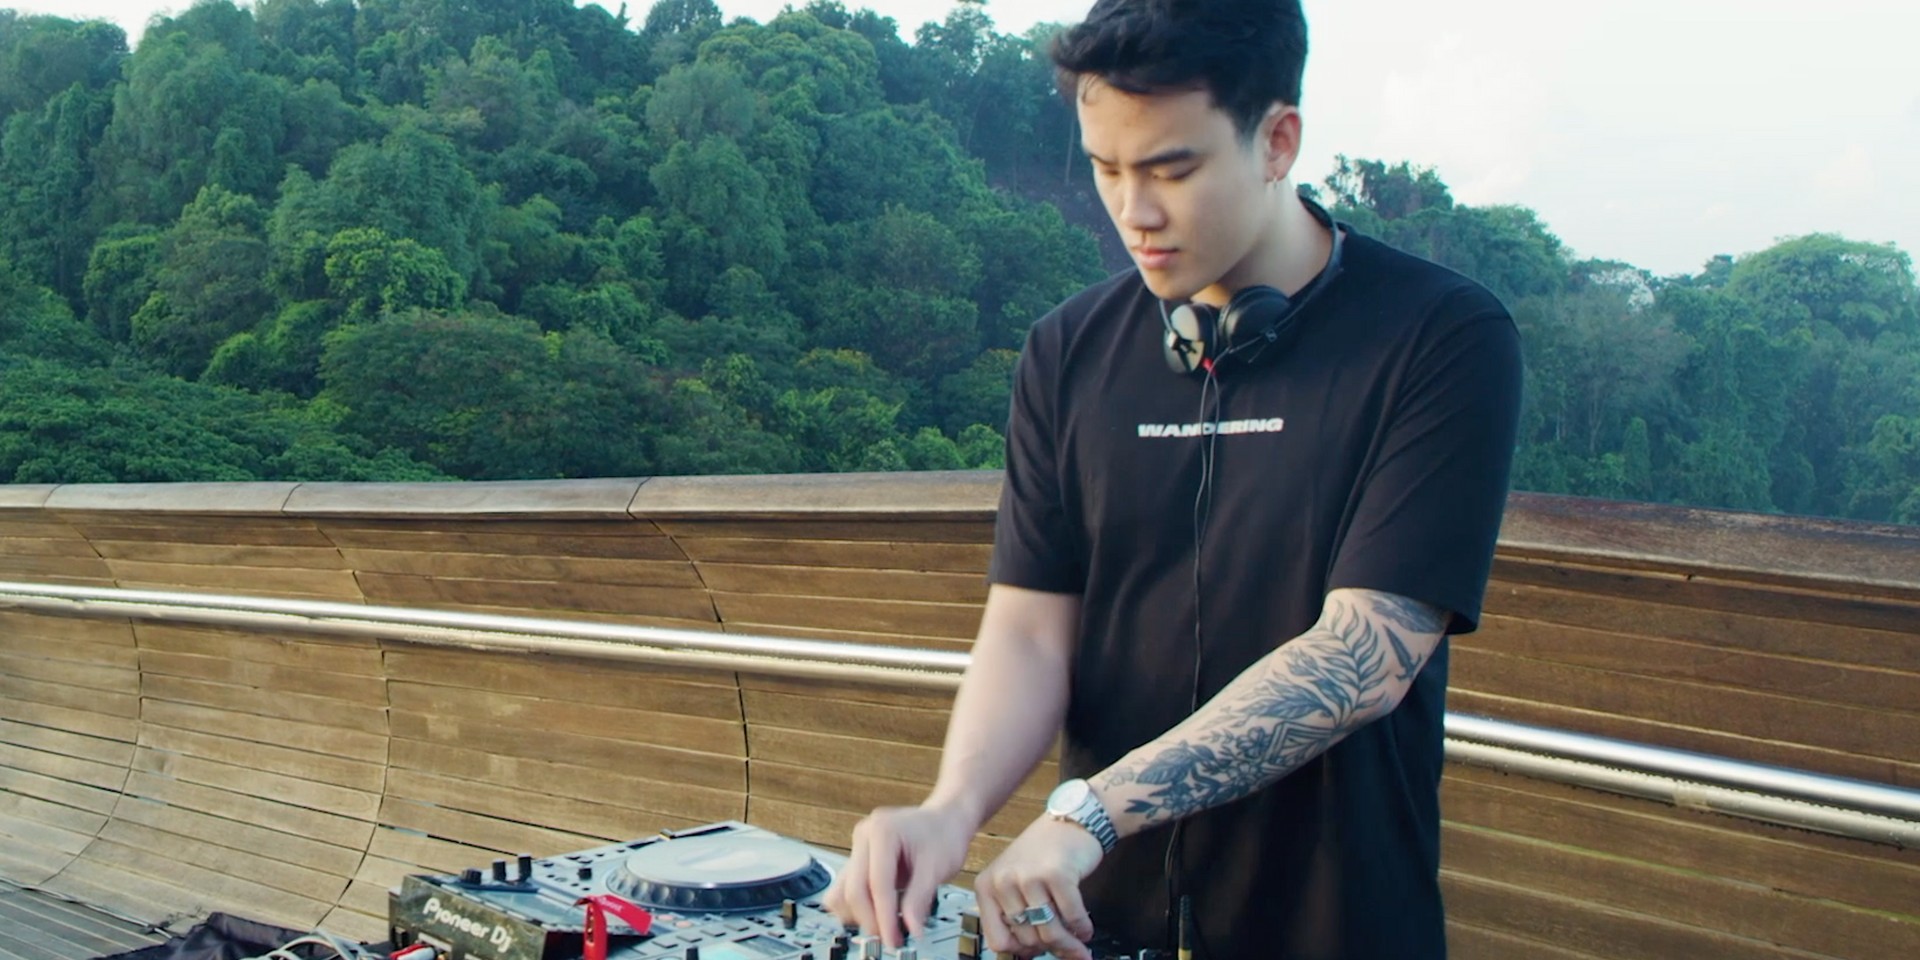 MYRNE captivates in live set at Singapore’s Henderson Waves in second episode of new video series – watch